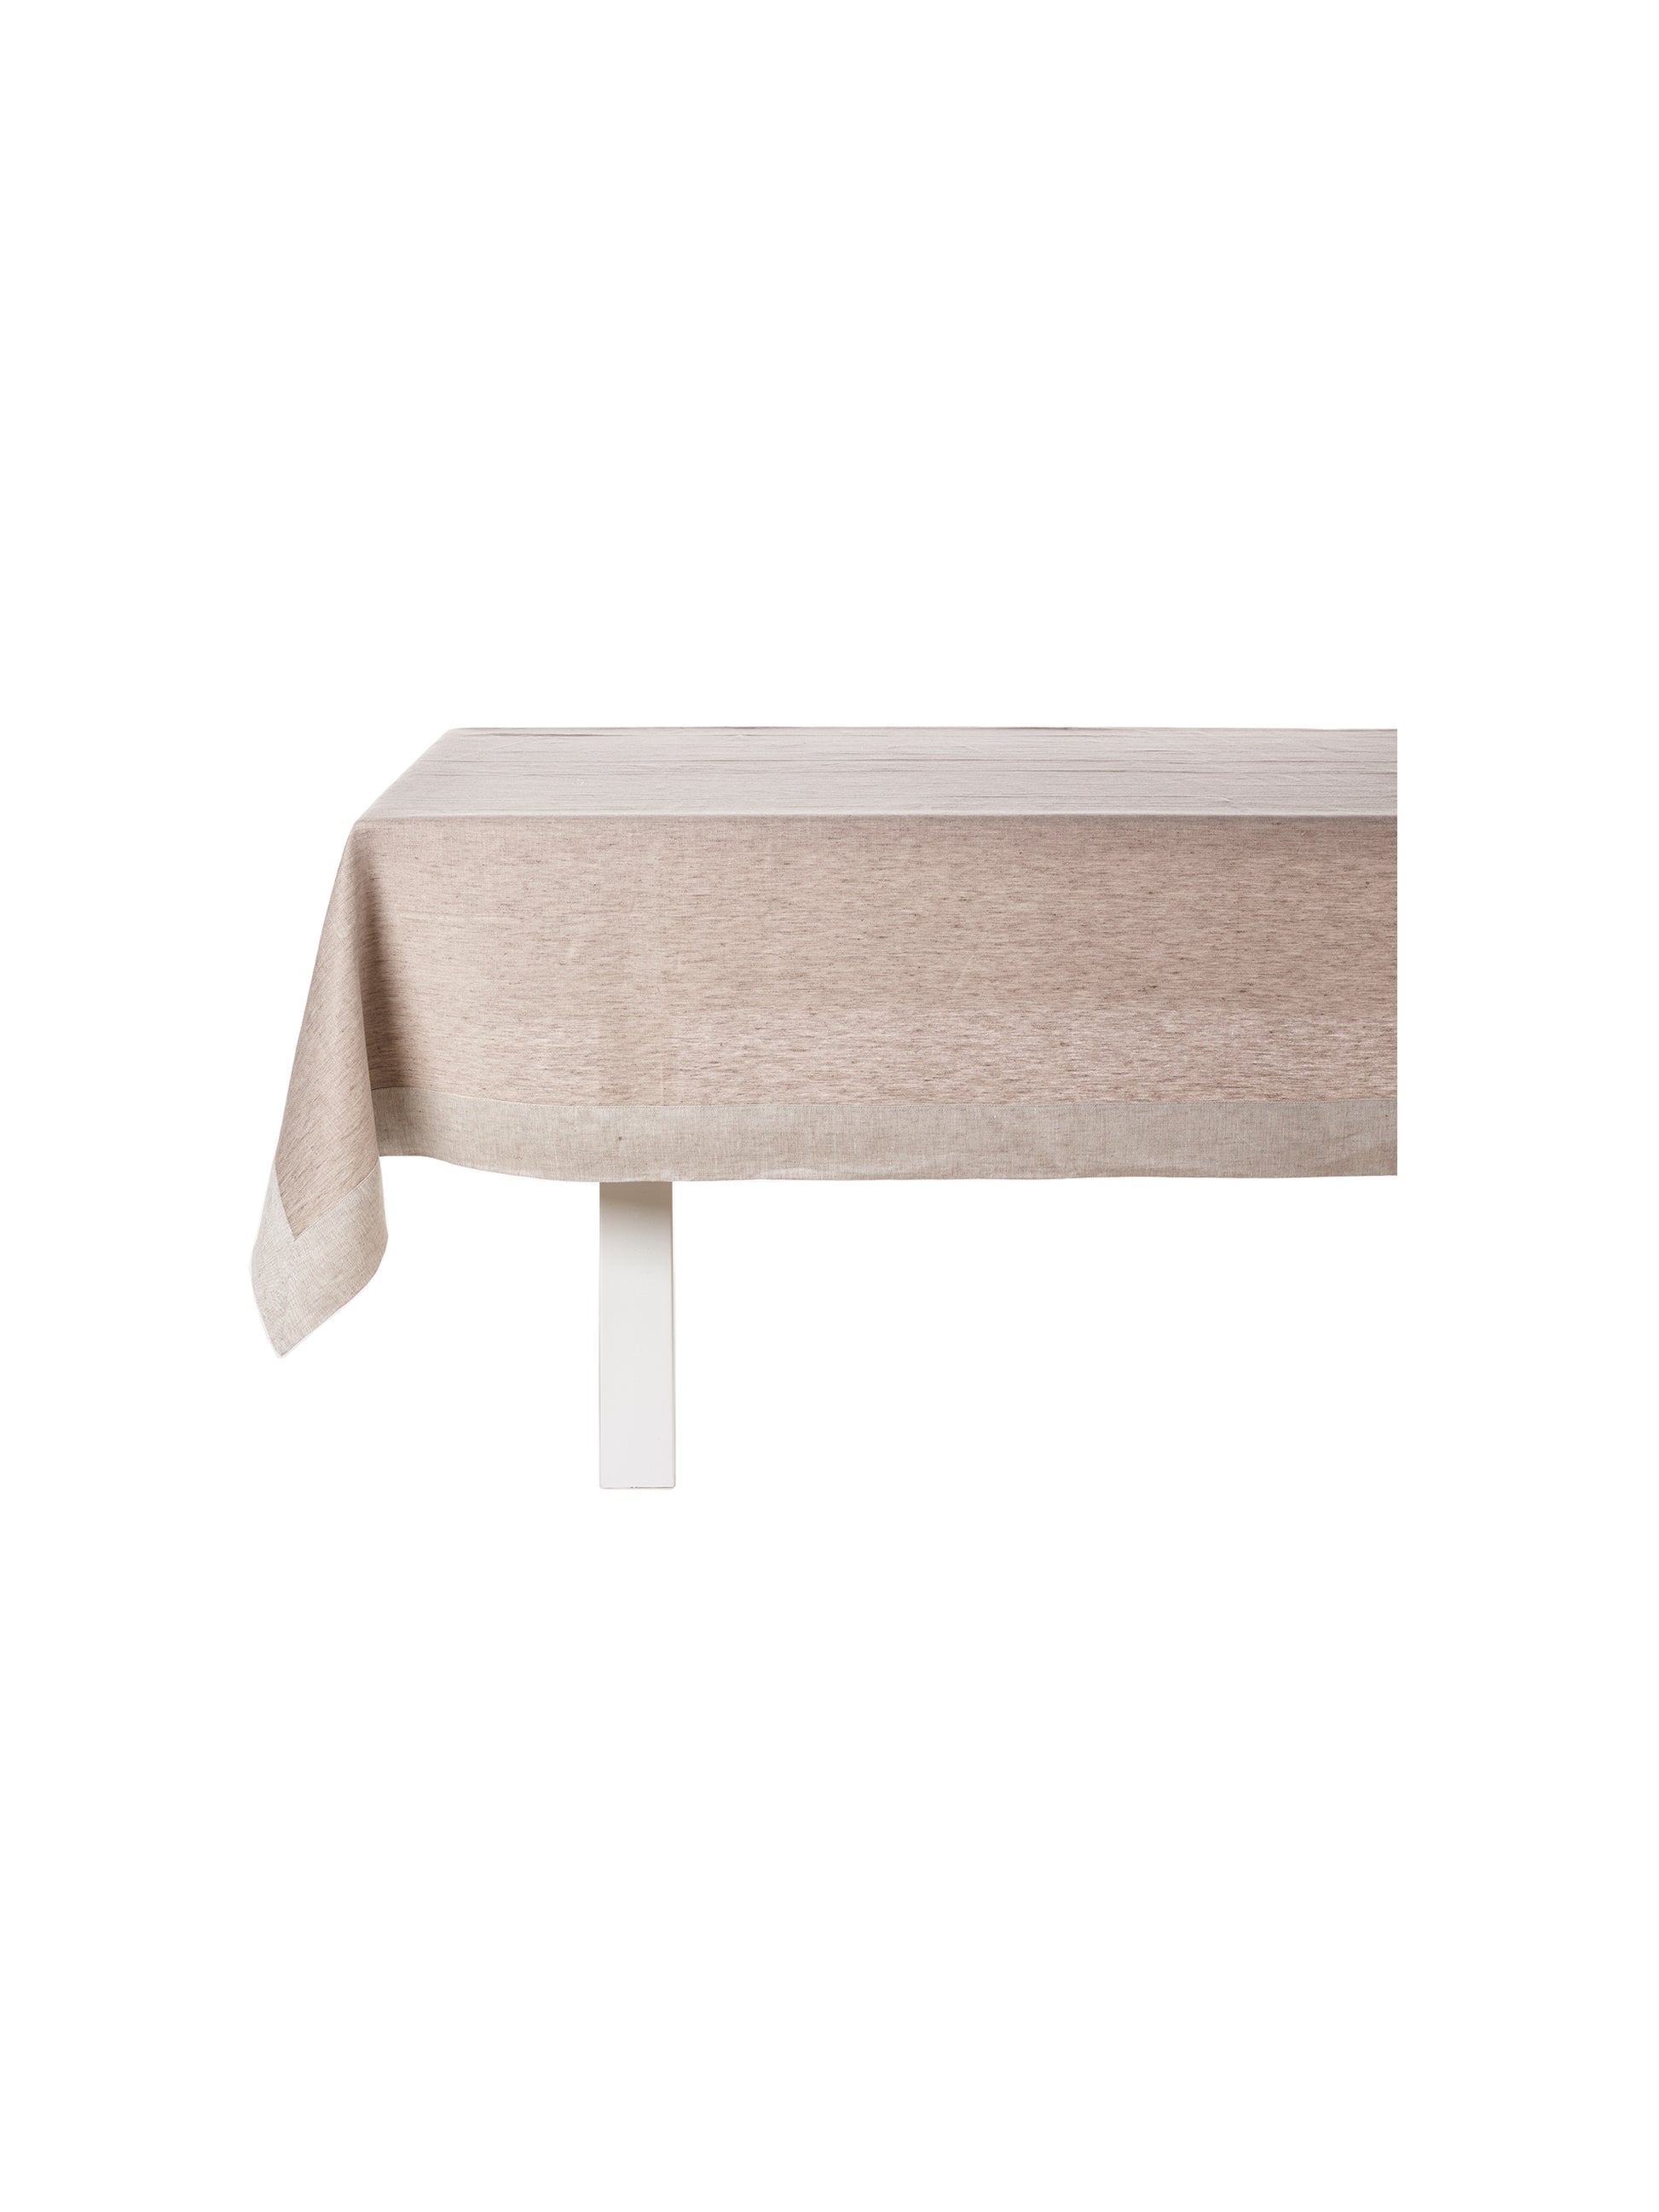 Libeco Frascati Linen Collection Flax Tablecloth Weston Table